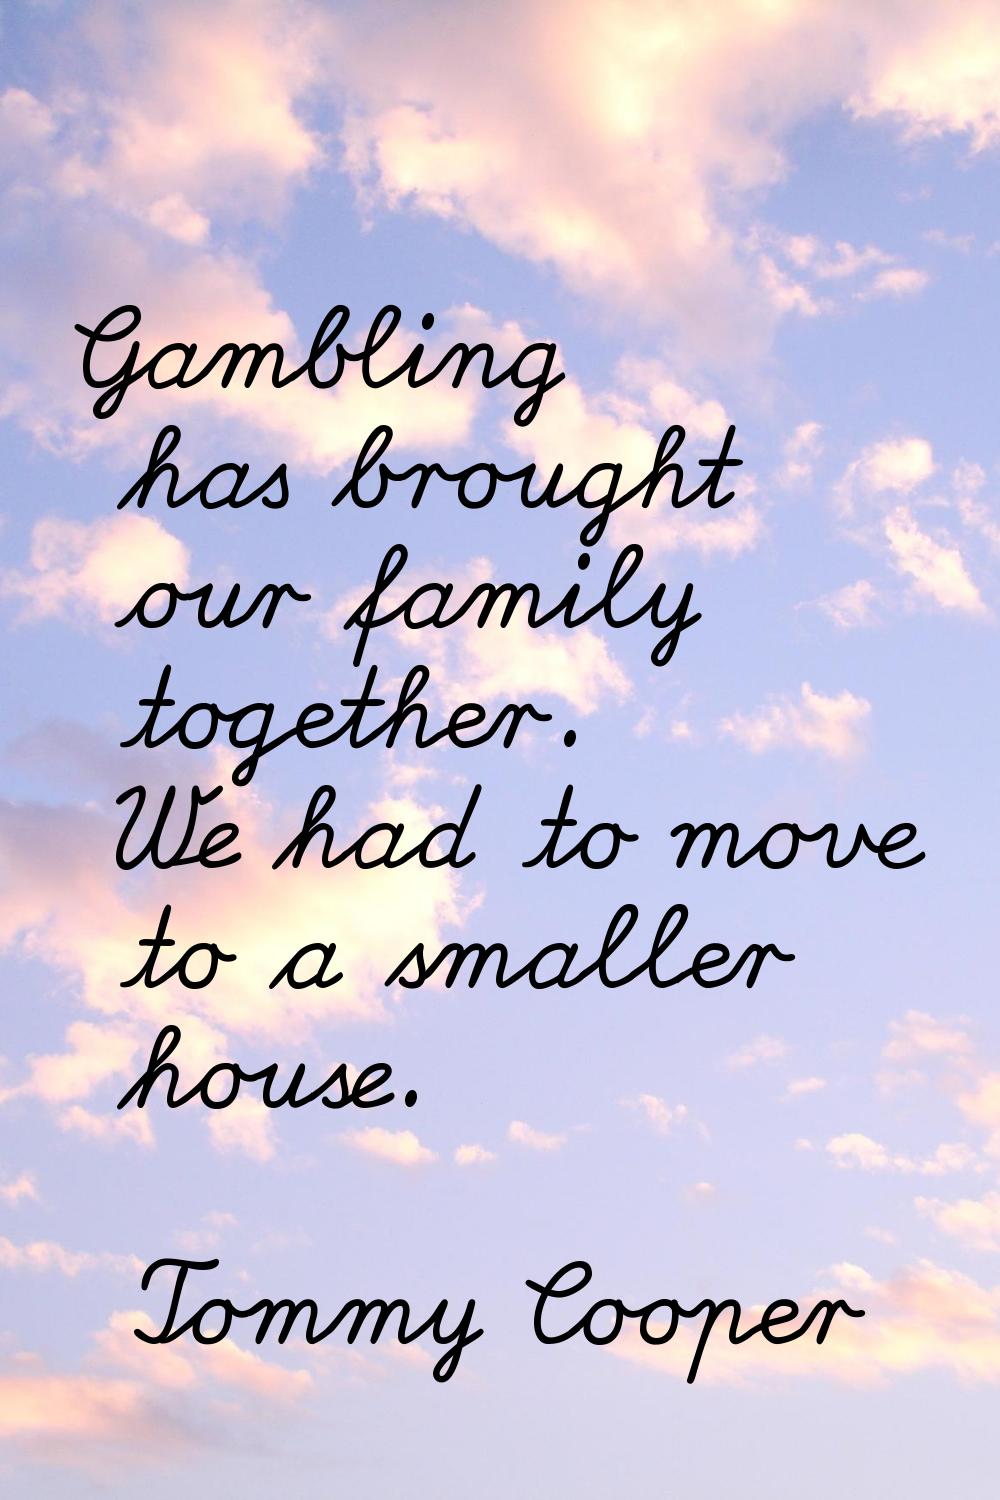 Gambling has brought our family together. We had to move to a smaller house.